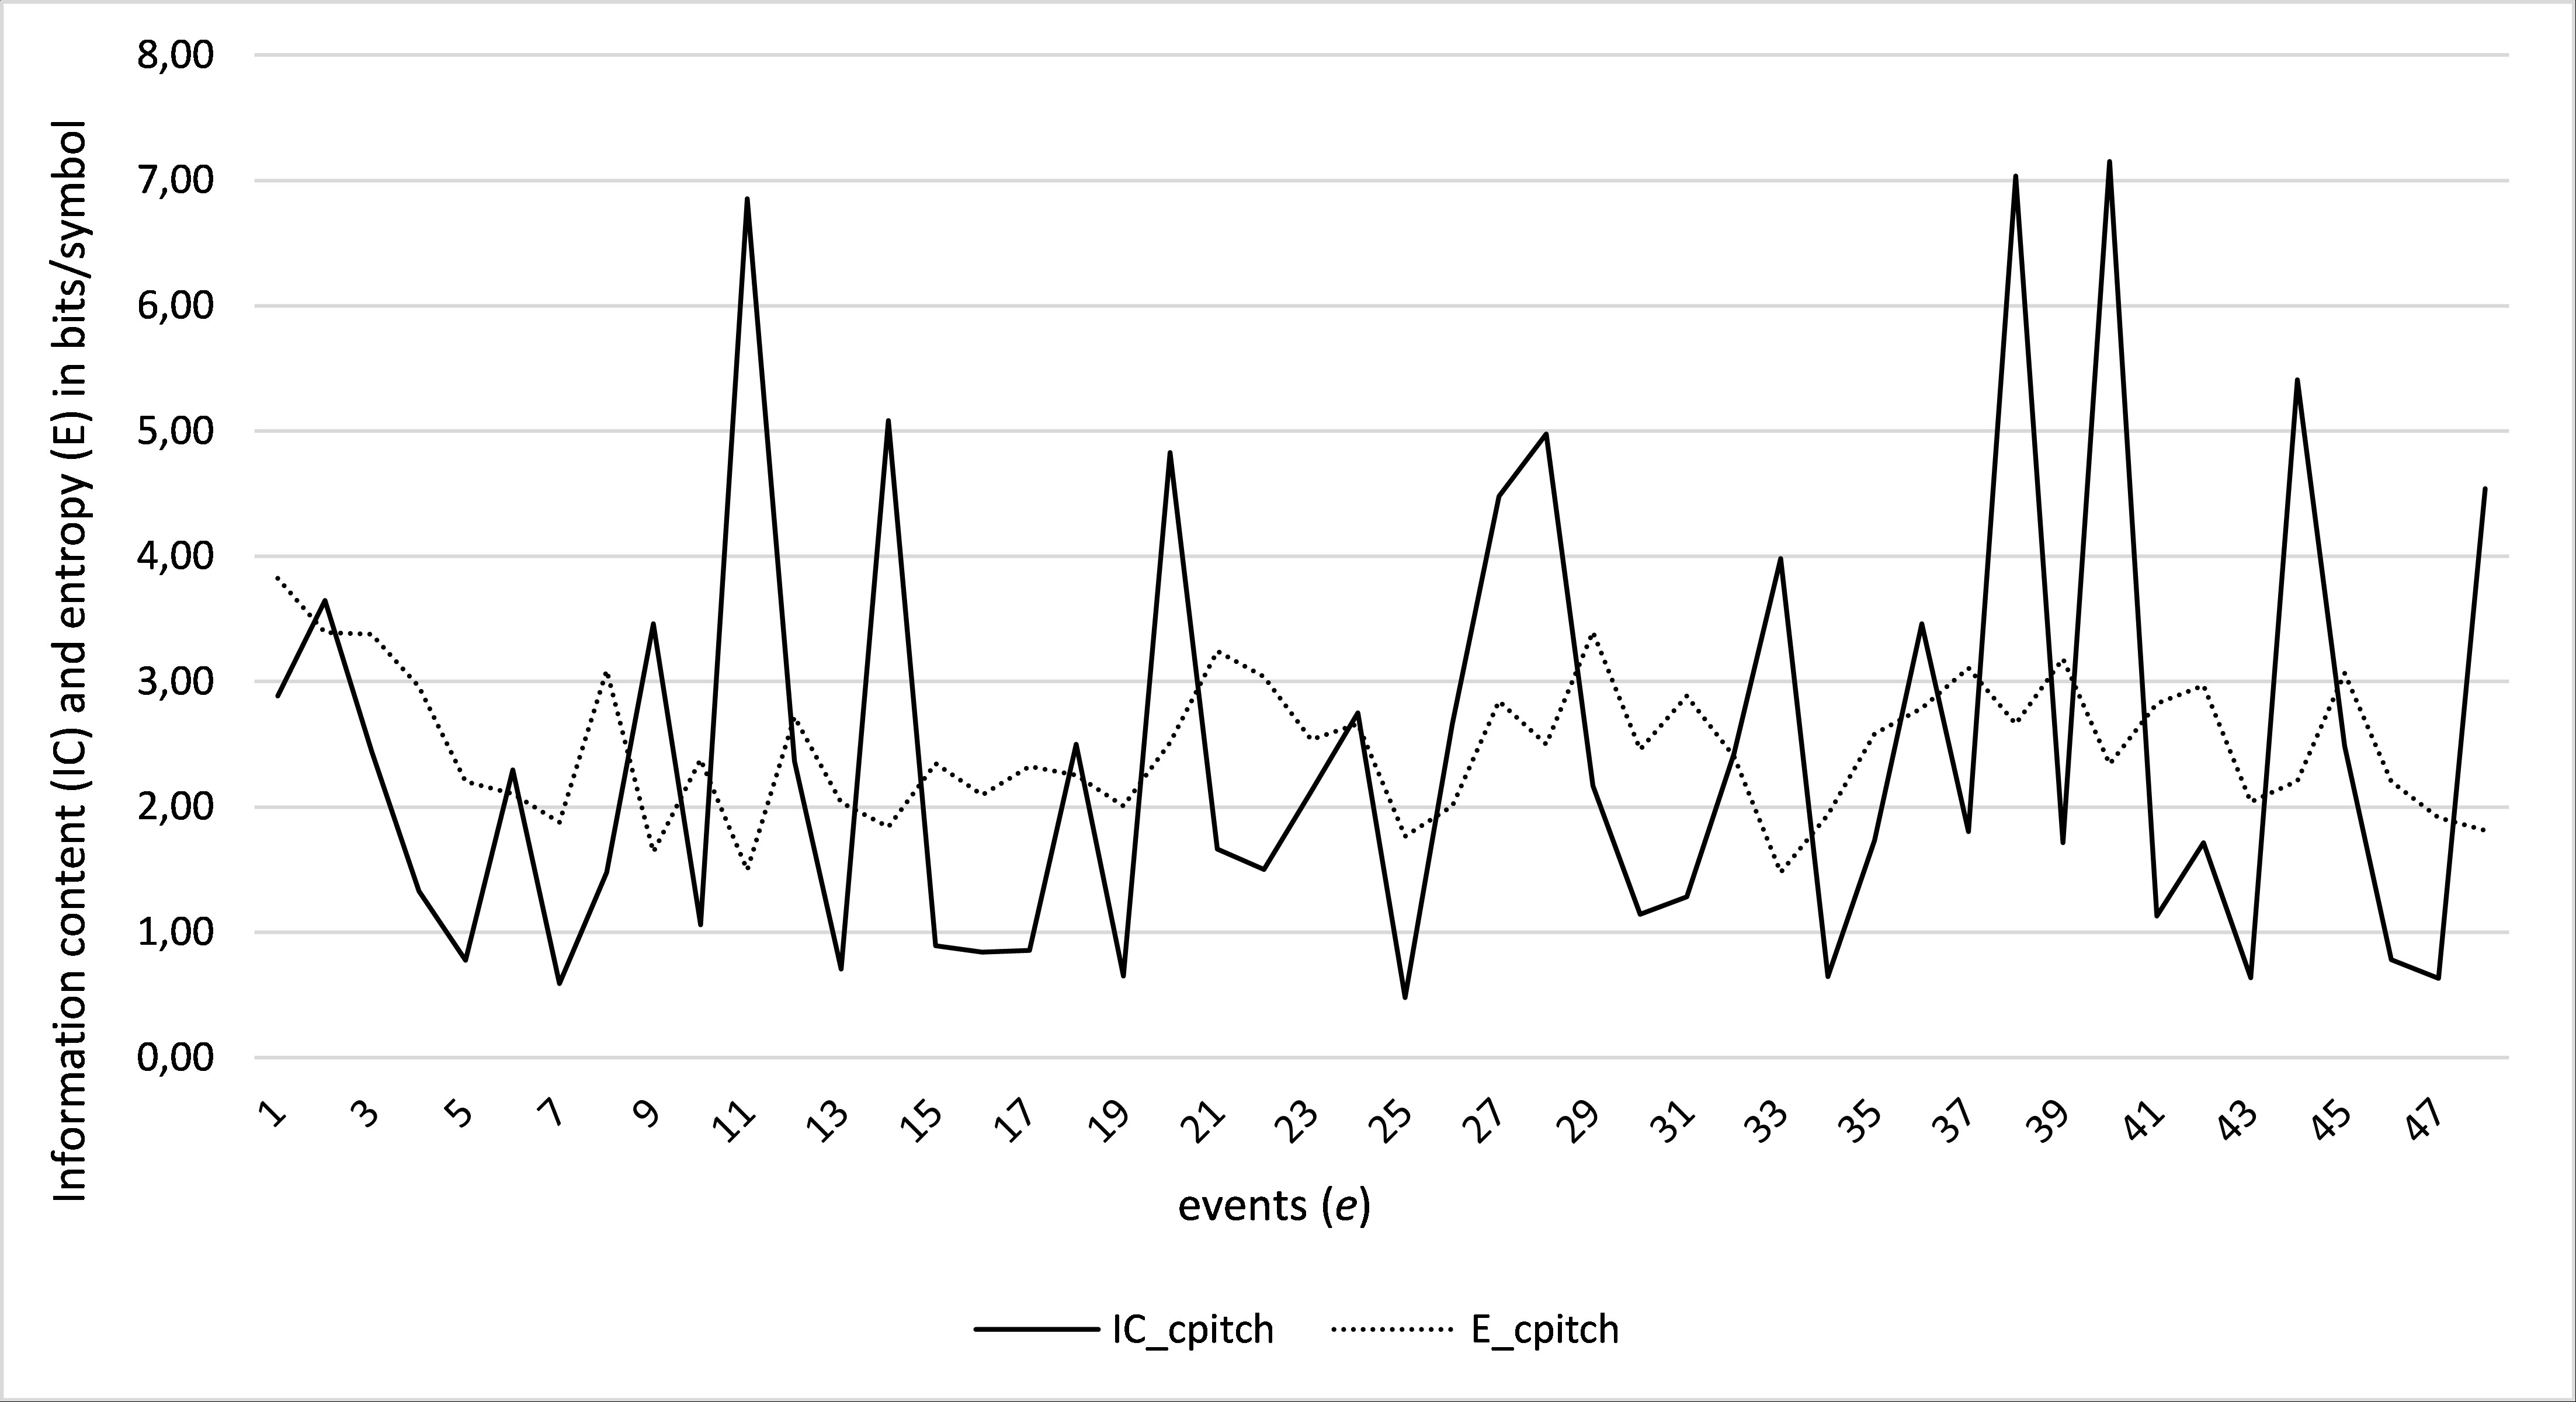 Two line charts of Informatiom content (IC) and entropy (E) in bits/symbol, which is on the y-axis, by events (e), which is on the x-axis. The y-axis spans from 0,00 to 8,00. The IC_cpitch line has many peaks and spans from almost 0,00 to 7,00. The E_cpitch line spans from between 1,00 and 2,00 to 4,00 and has significantly less steep peaks. More description below. 